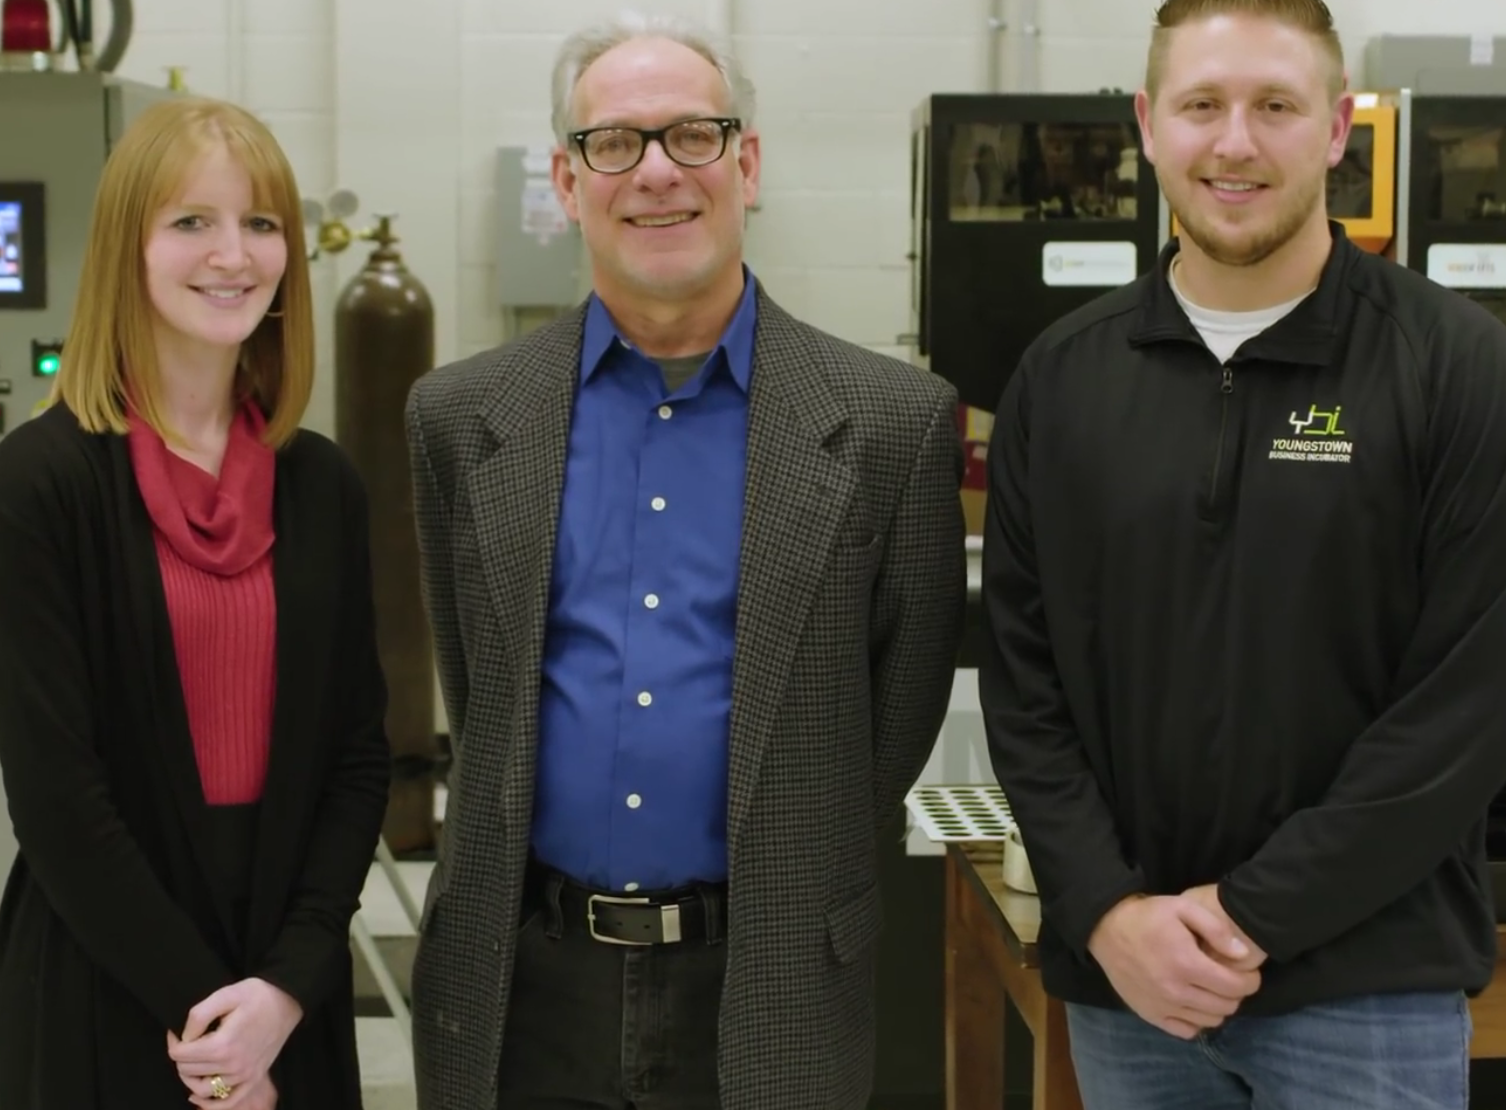 Martin Cala, center, professor of Industrial Systems Engineering, with former students, Ashley Totin and Zac Divencenzo, are featured in the "Rethinking Manufacturing" video.